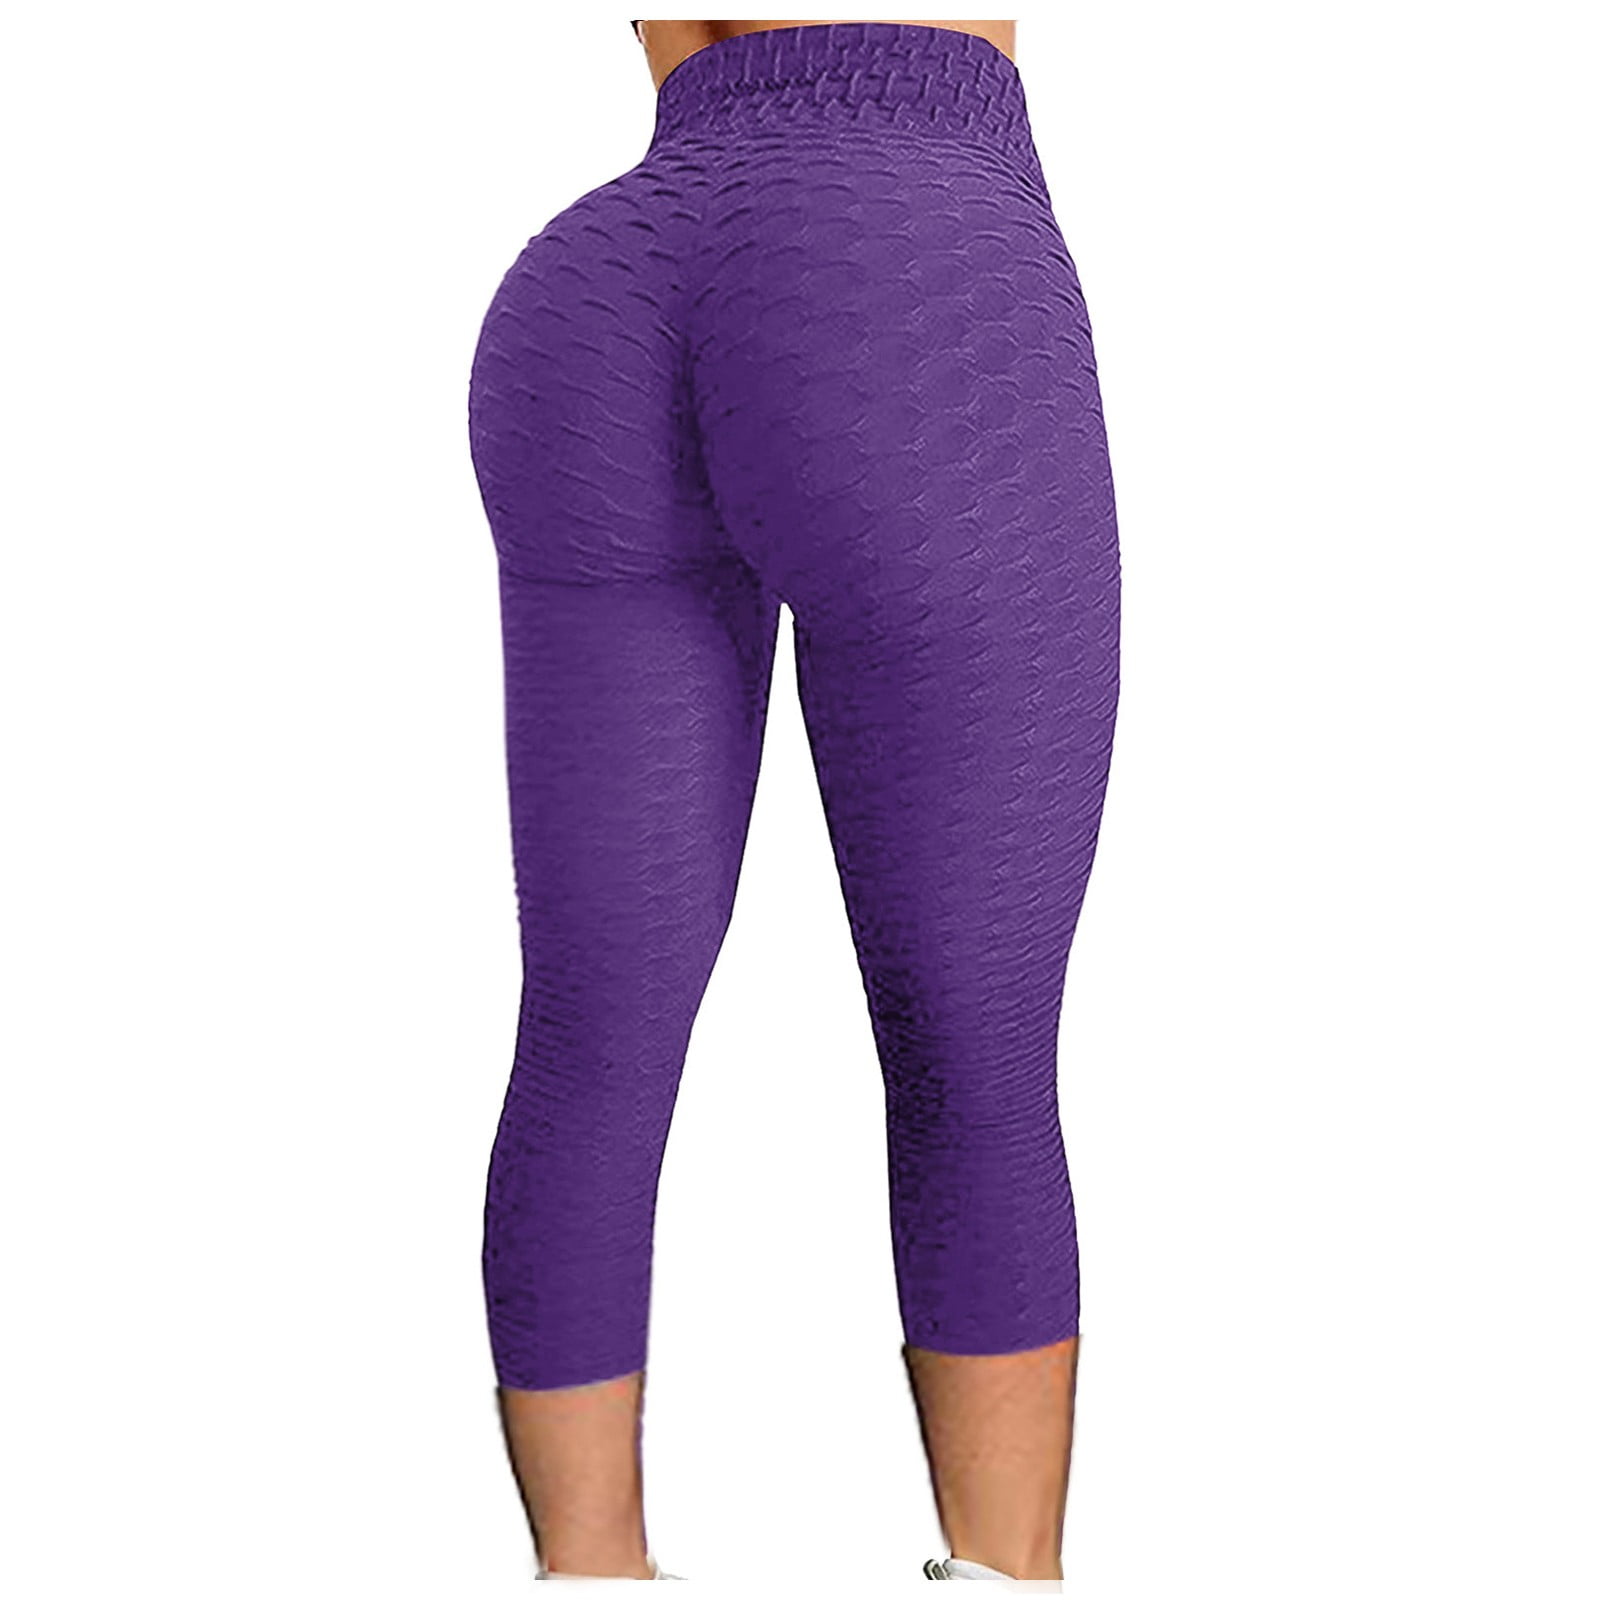 Aayomet Womens Yoga Pants Petite Bootcut Yoga Pants with Pockets for Women  High Waisted Bootleg Workout Pants Work Pants Women's Dress Pants,Purple S  